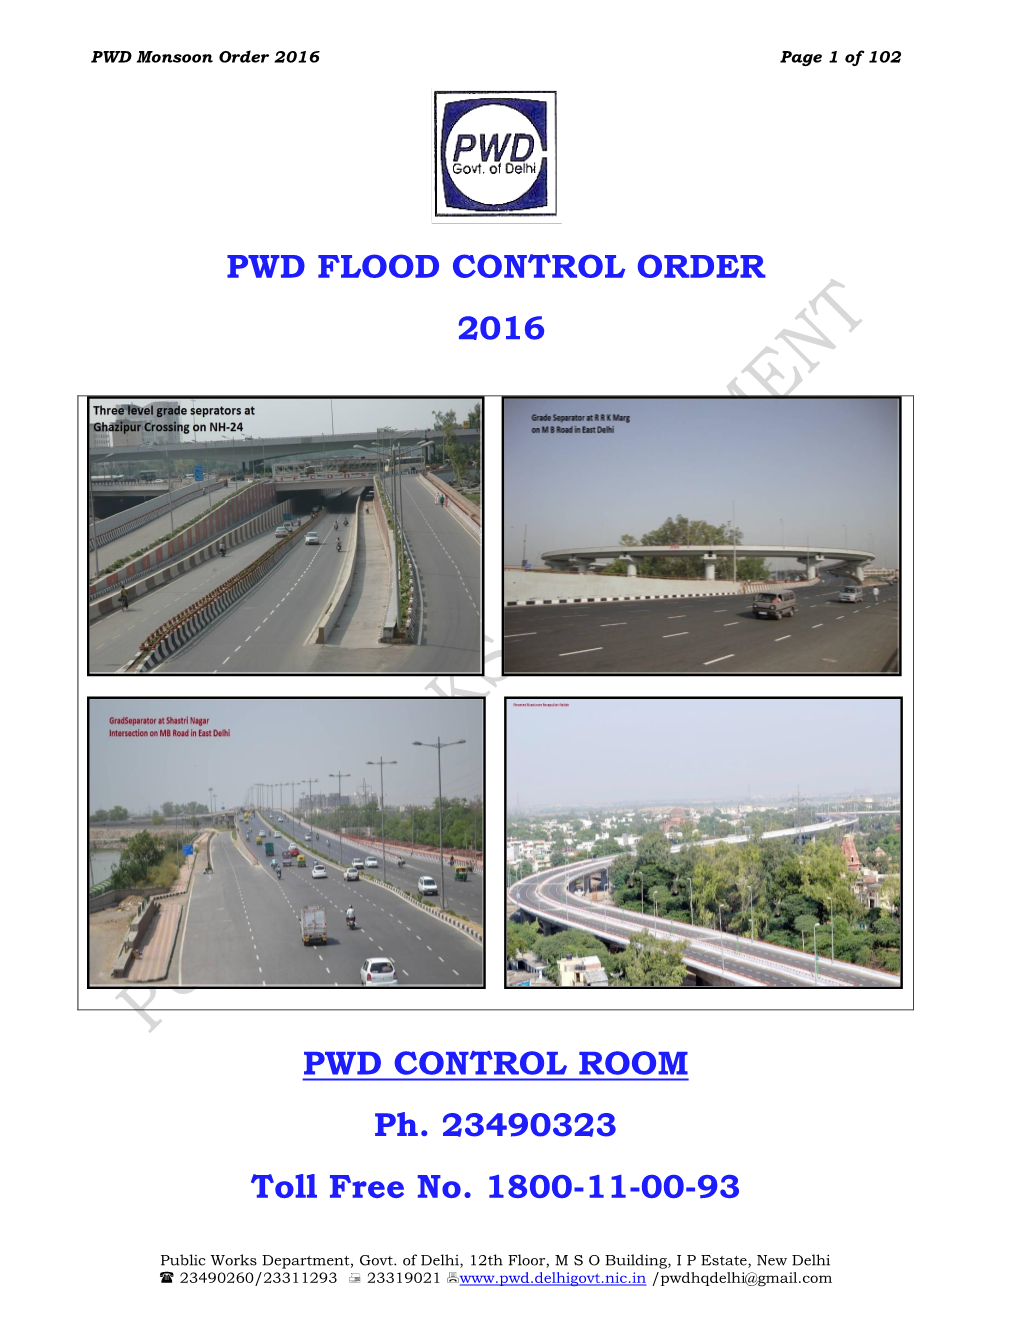 PWD FLOOD CONTROL ORDER 2016 PWD CONTROL ROOM Ph. 23490323 Toll Free No. 1800-11-00-93